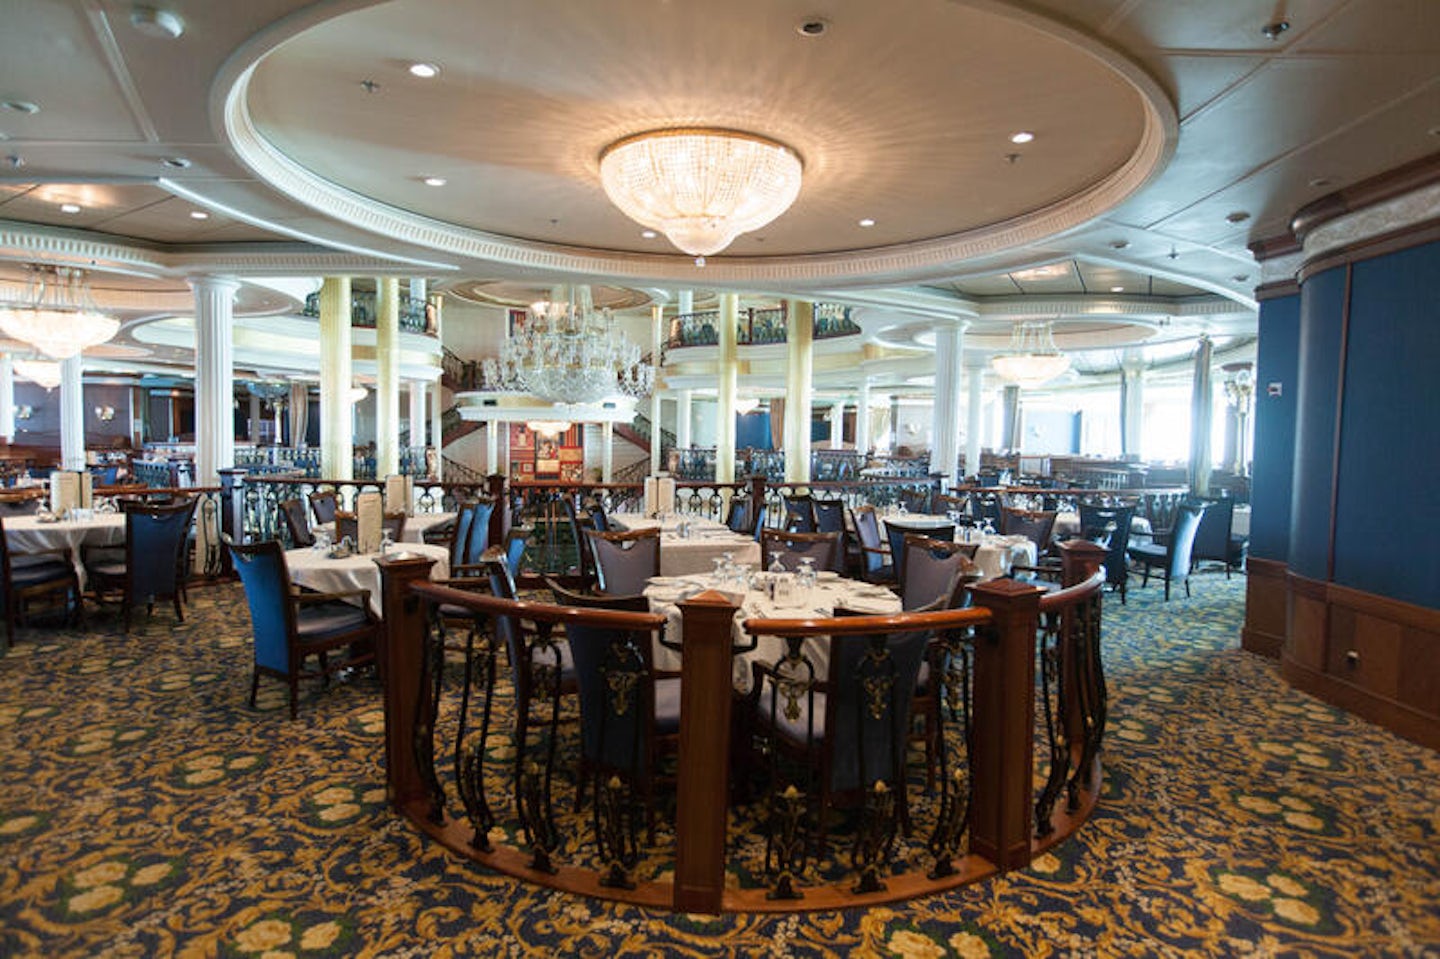 Othello Dining Room on Independence of the Seas